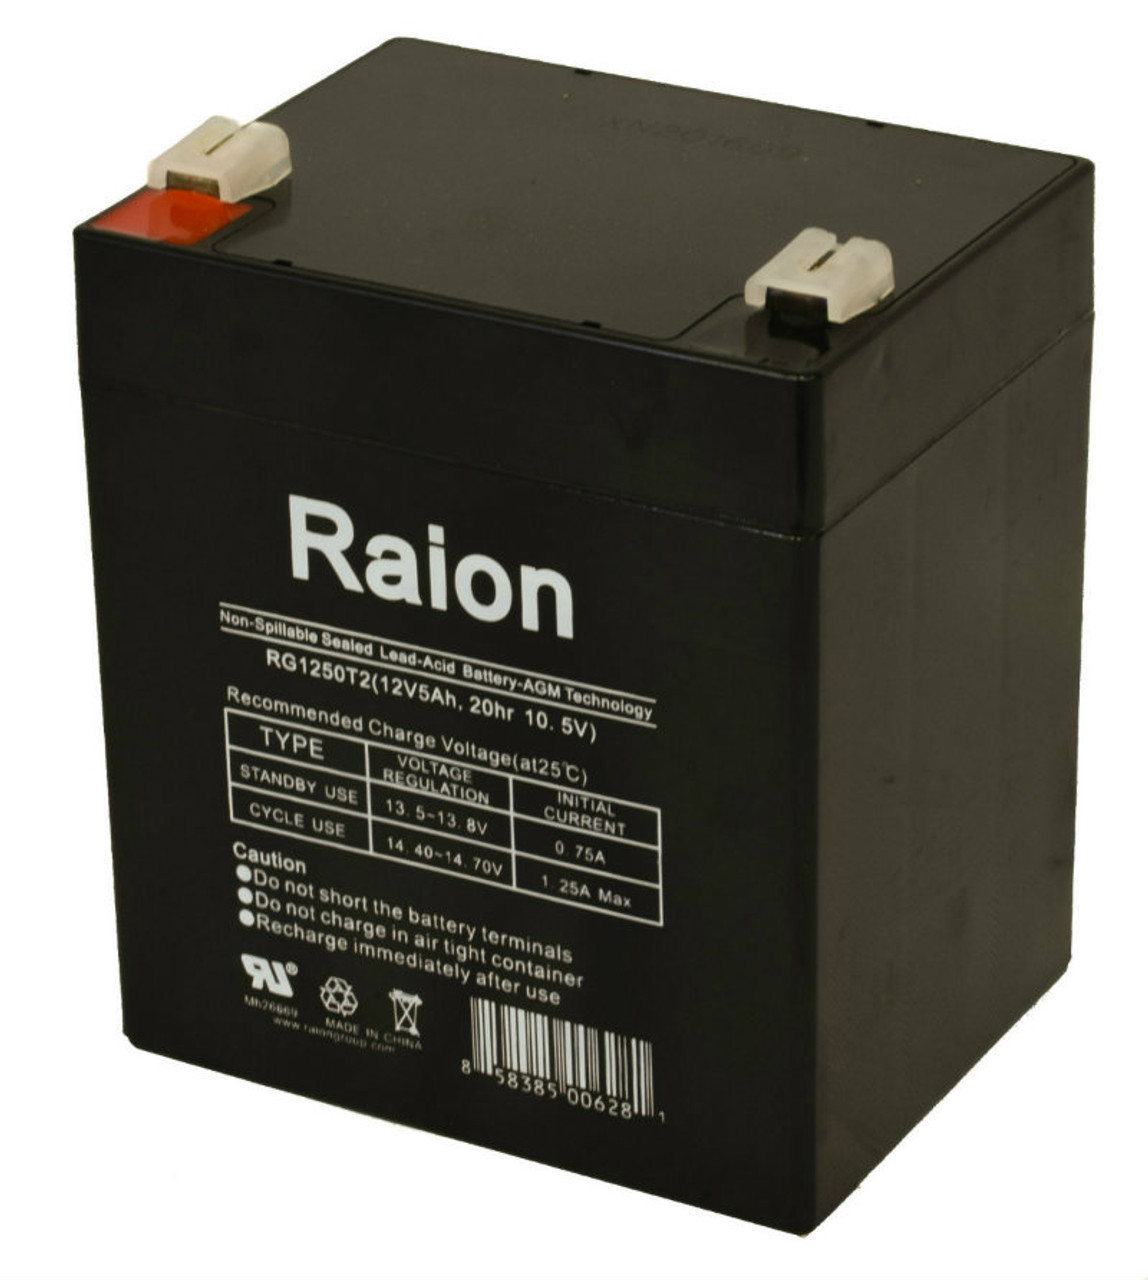 Raion Power RG1250T1 Replacement Fire Alarm Control Panel Battery for Securitron 12VOLT 4AMP